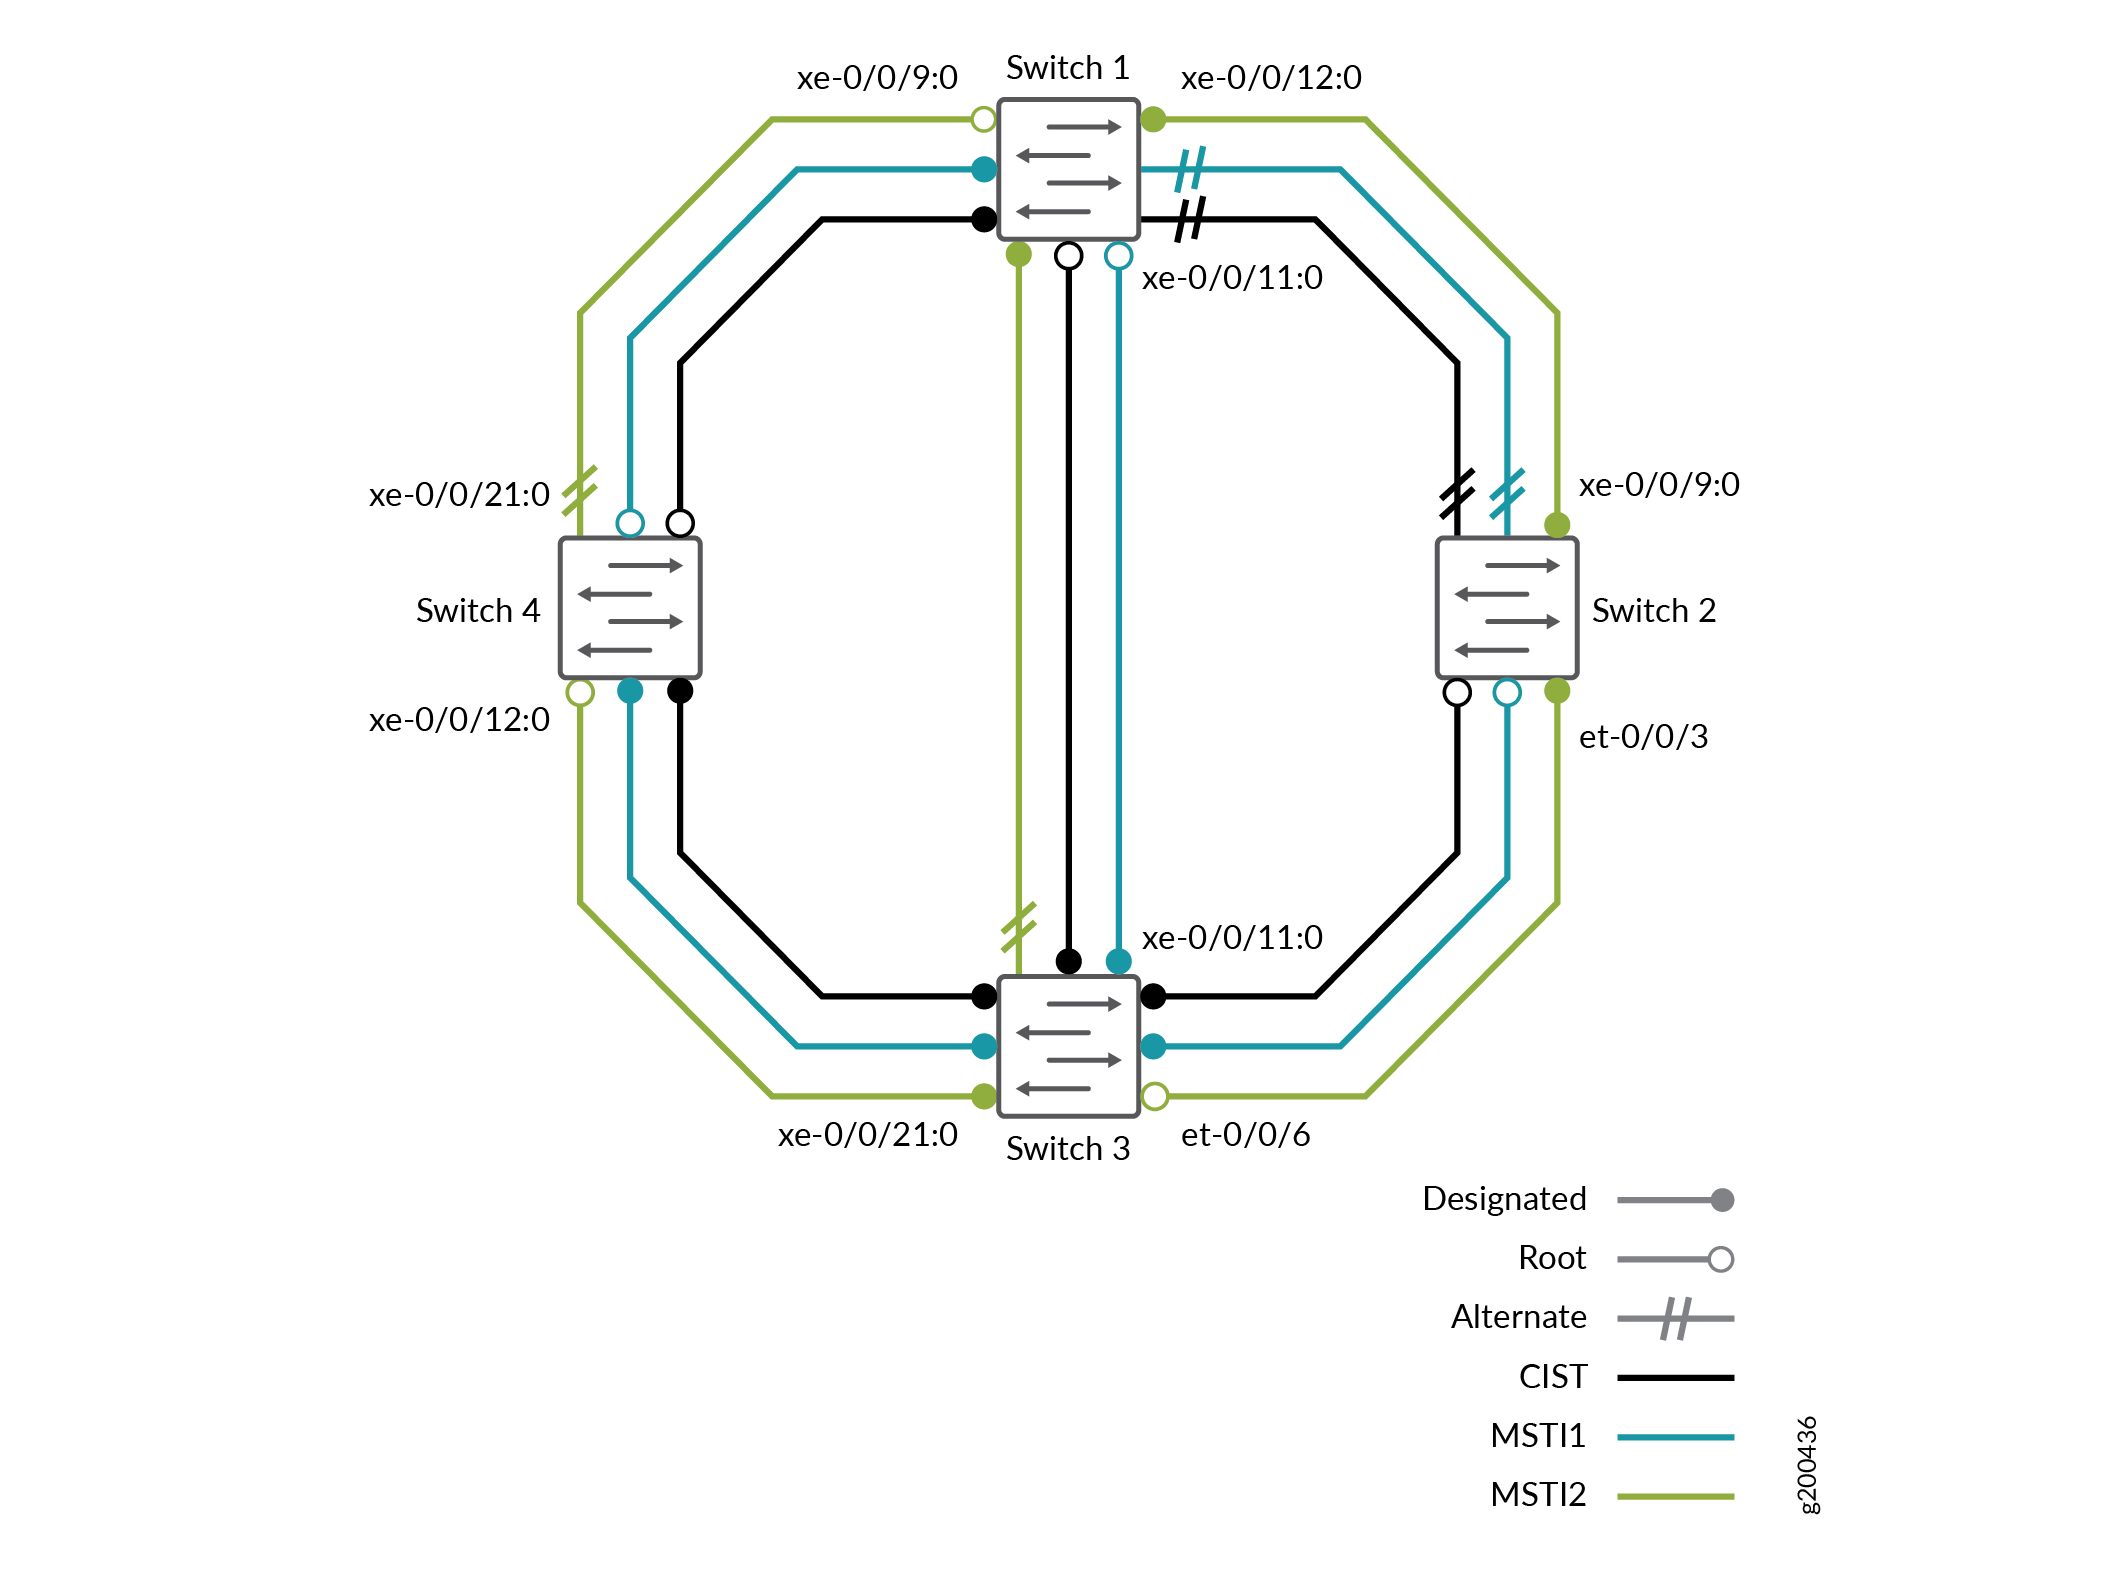 Network Topology for MSTP